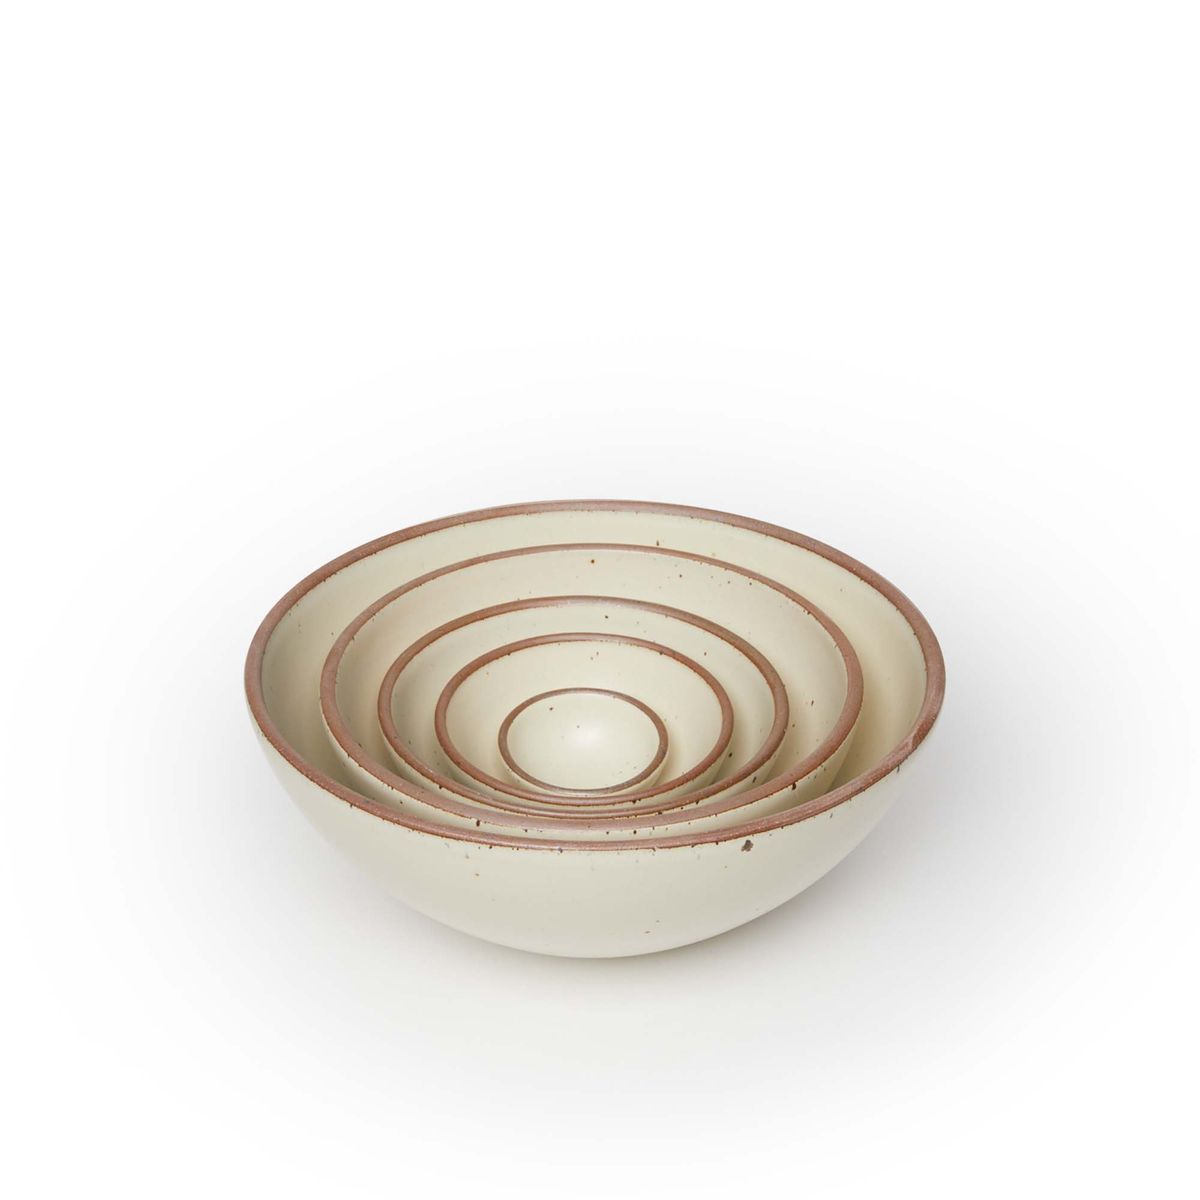 A bitty bowl, ice cream bowl, soup bowl, popcorn bowl, and mixing bowl nesting together in a warm, tan-toned, off-white color featuring iron speckles